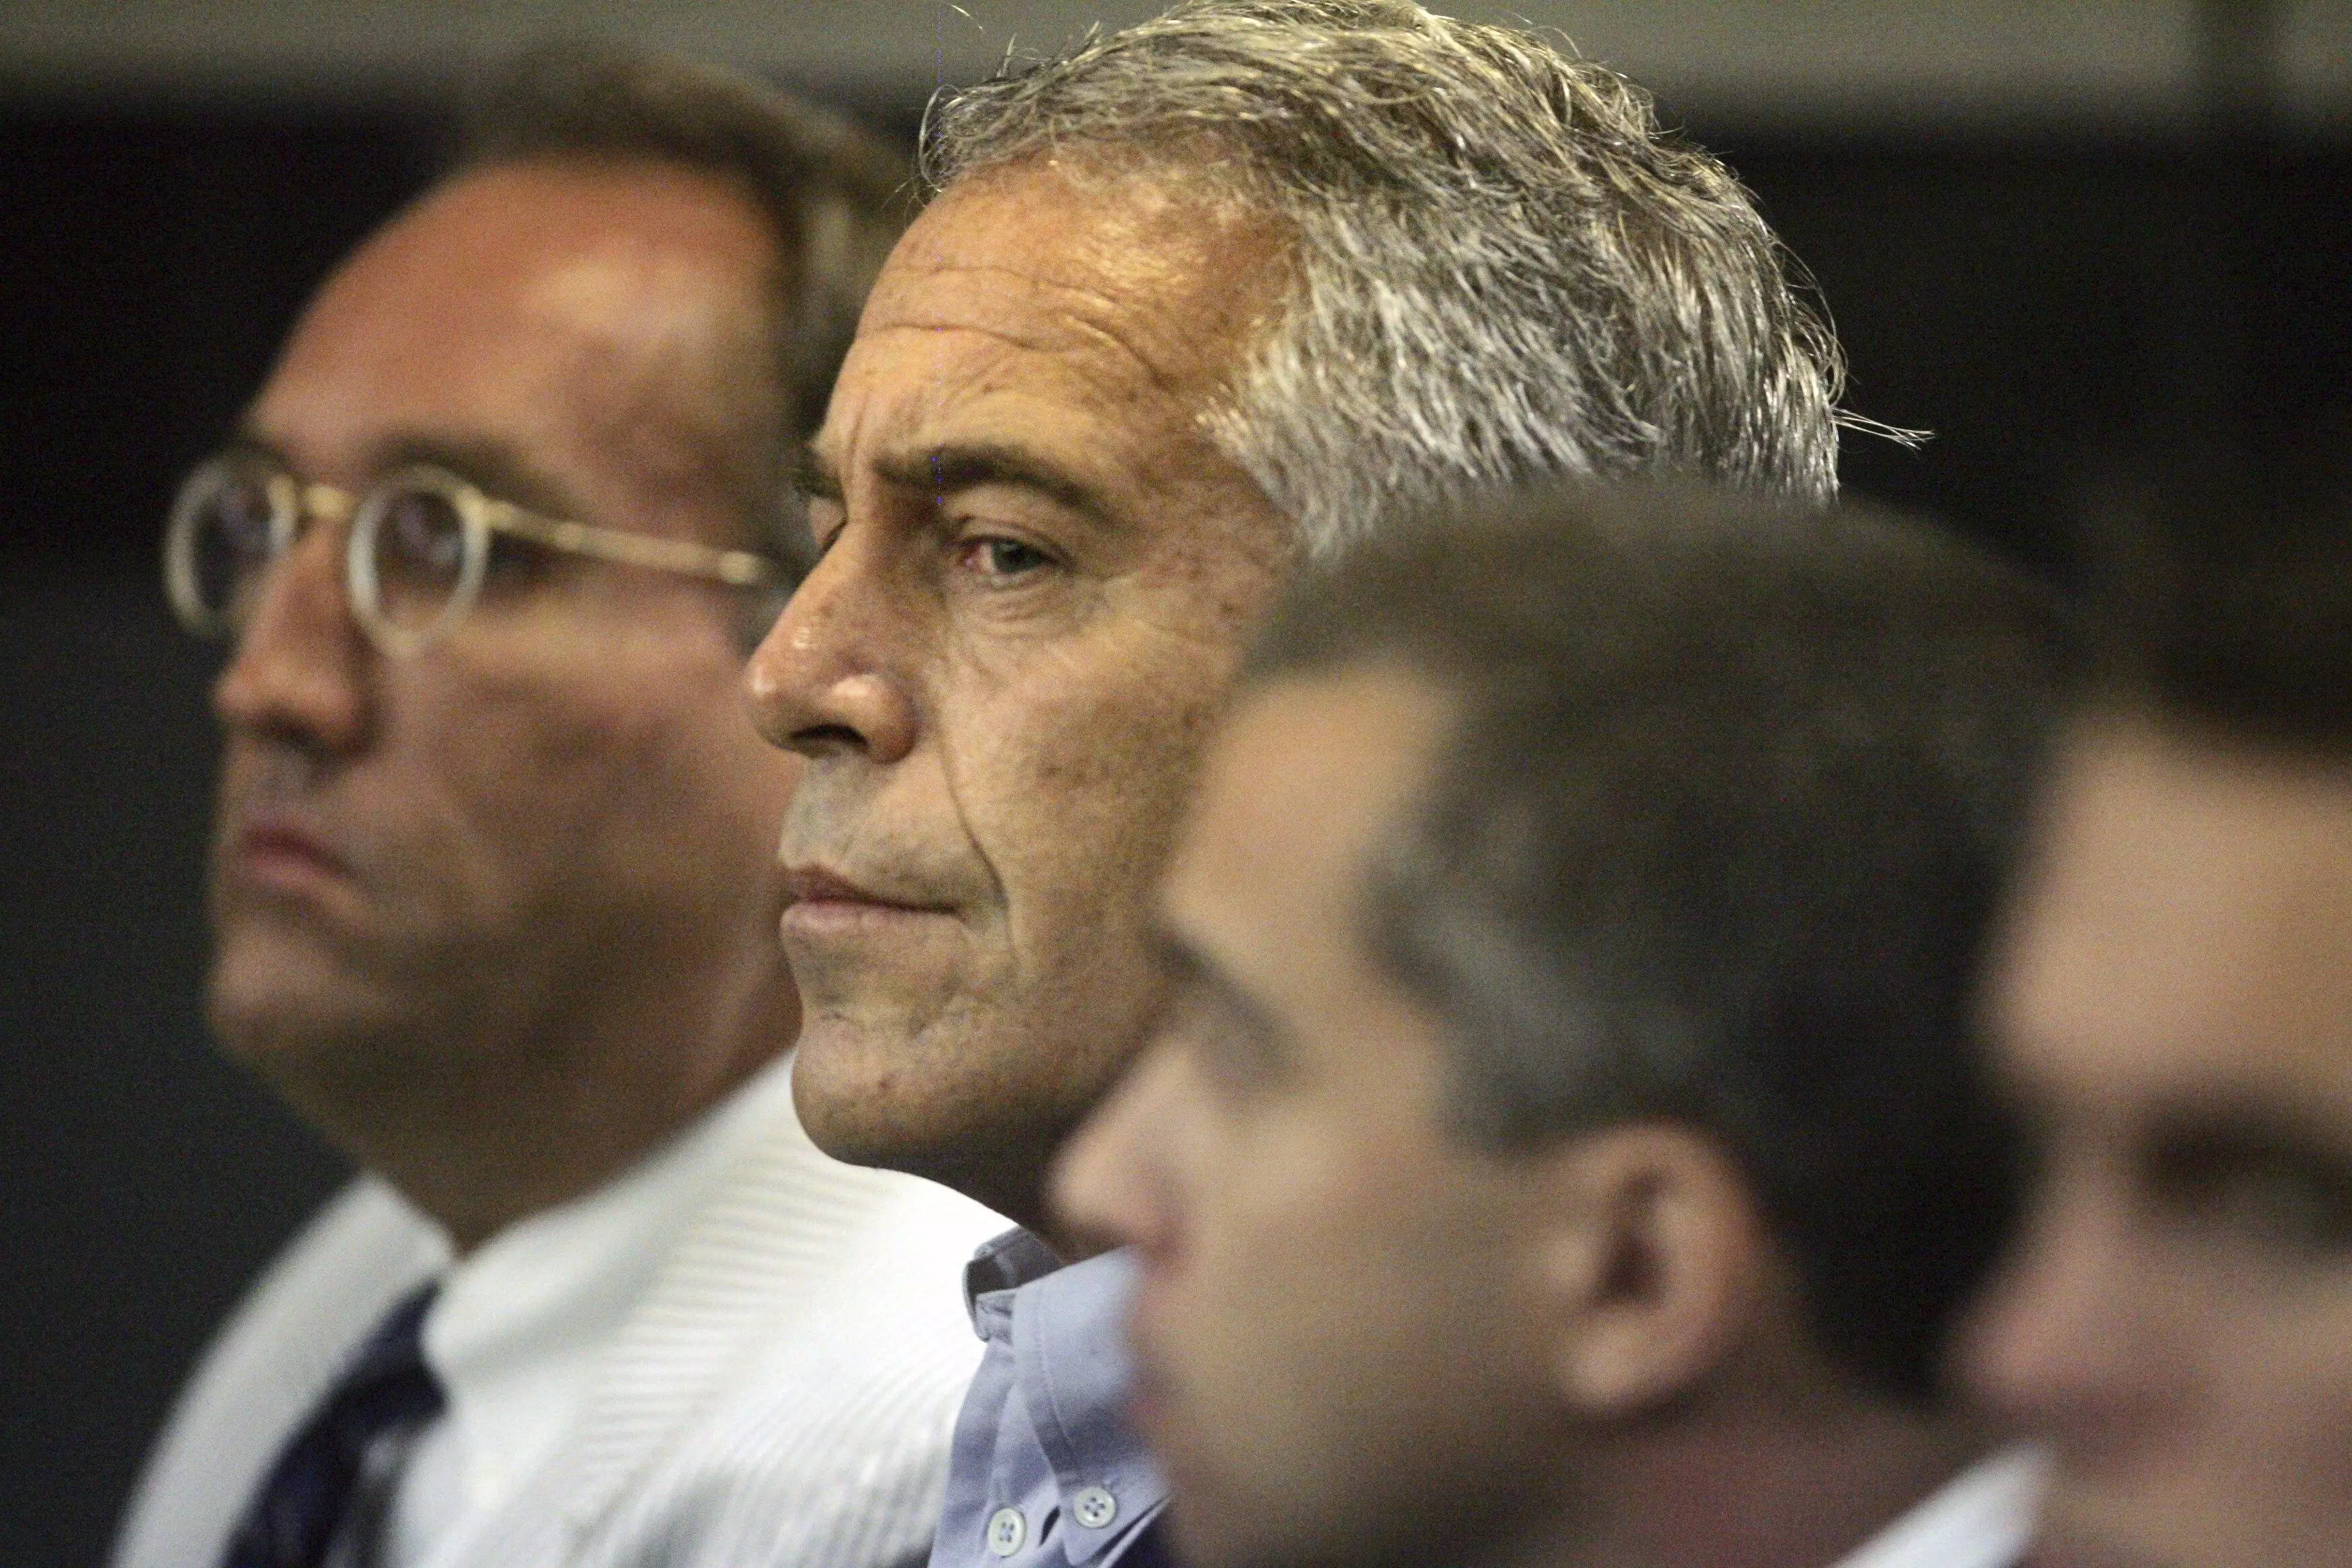 Epstein's death prevented his upcoming trial from going ahead.